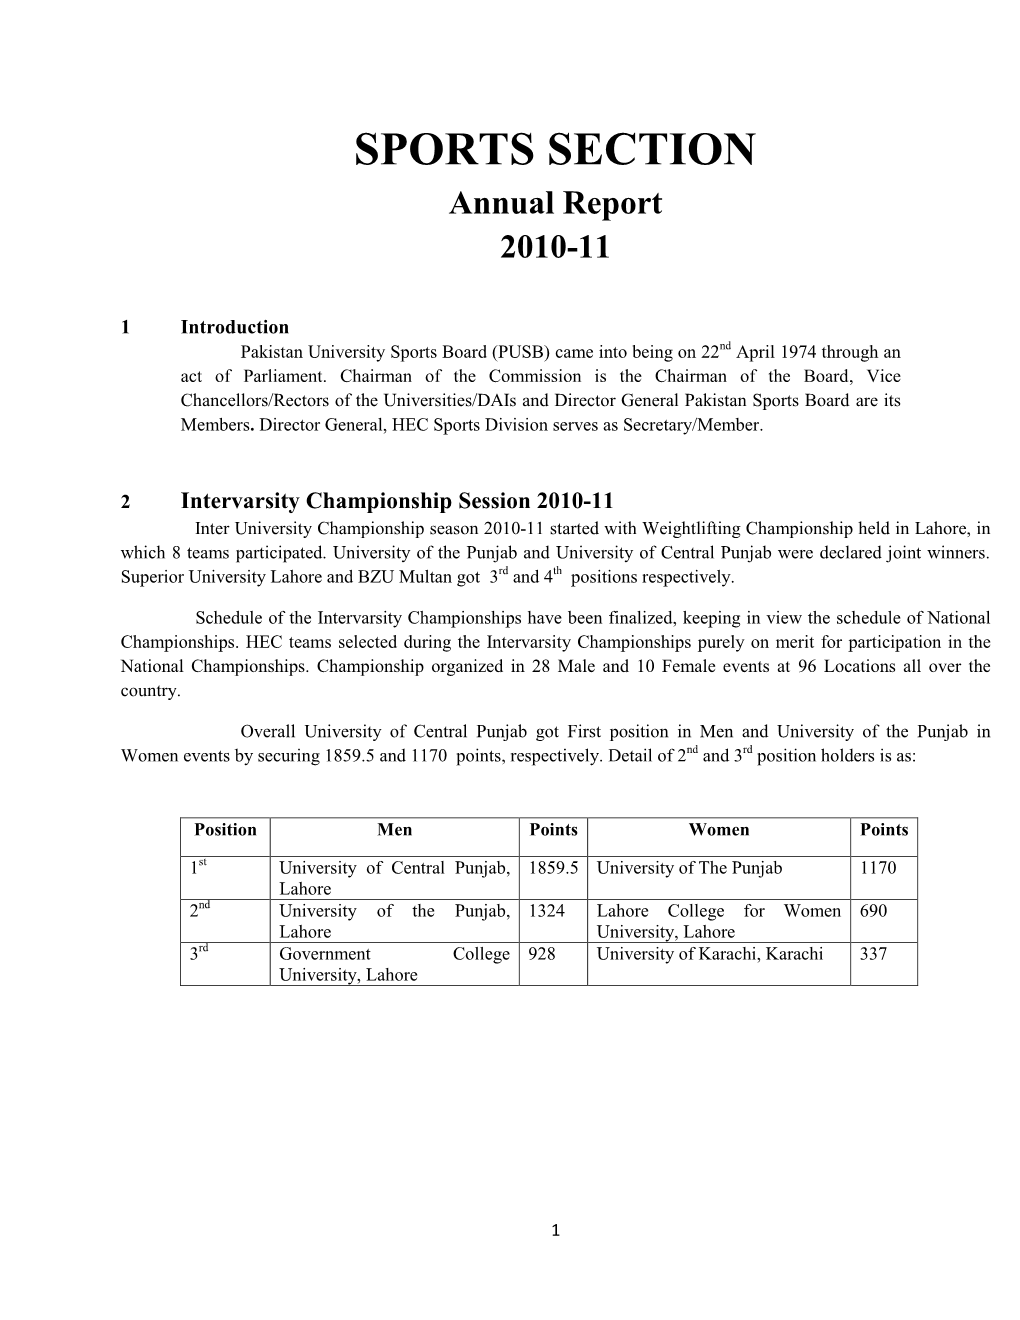 SPORTS SECTION Annual Report 2010-11